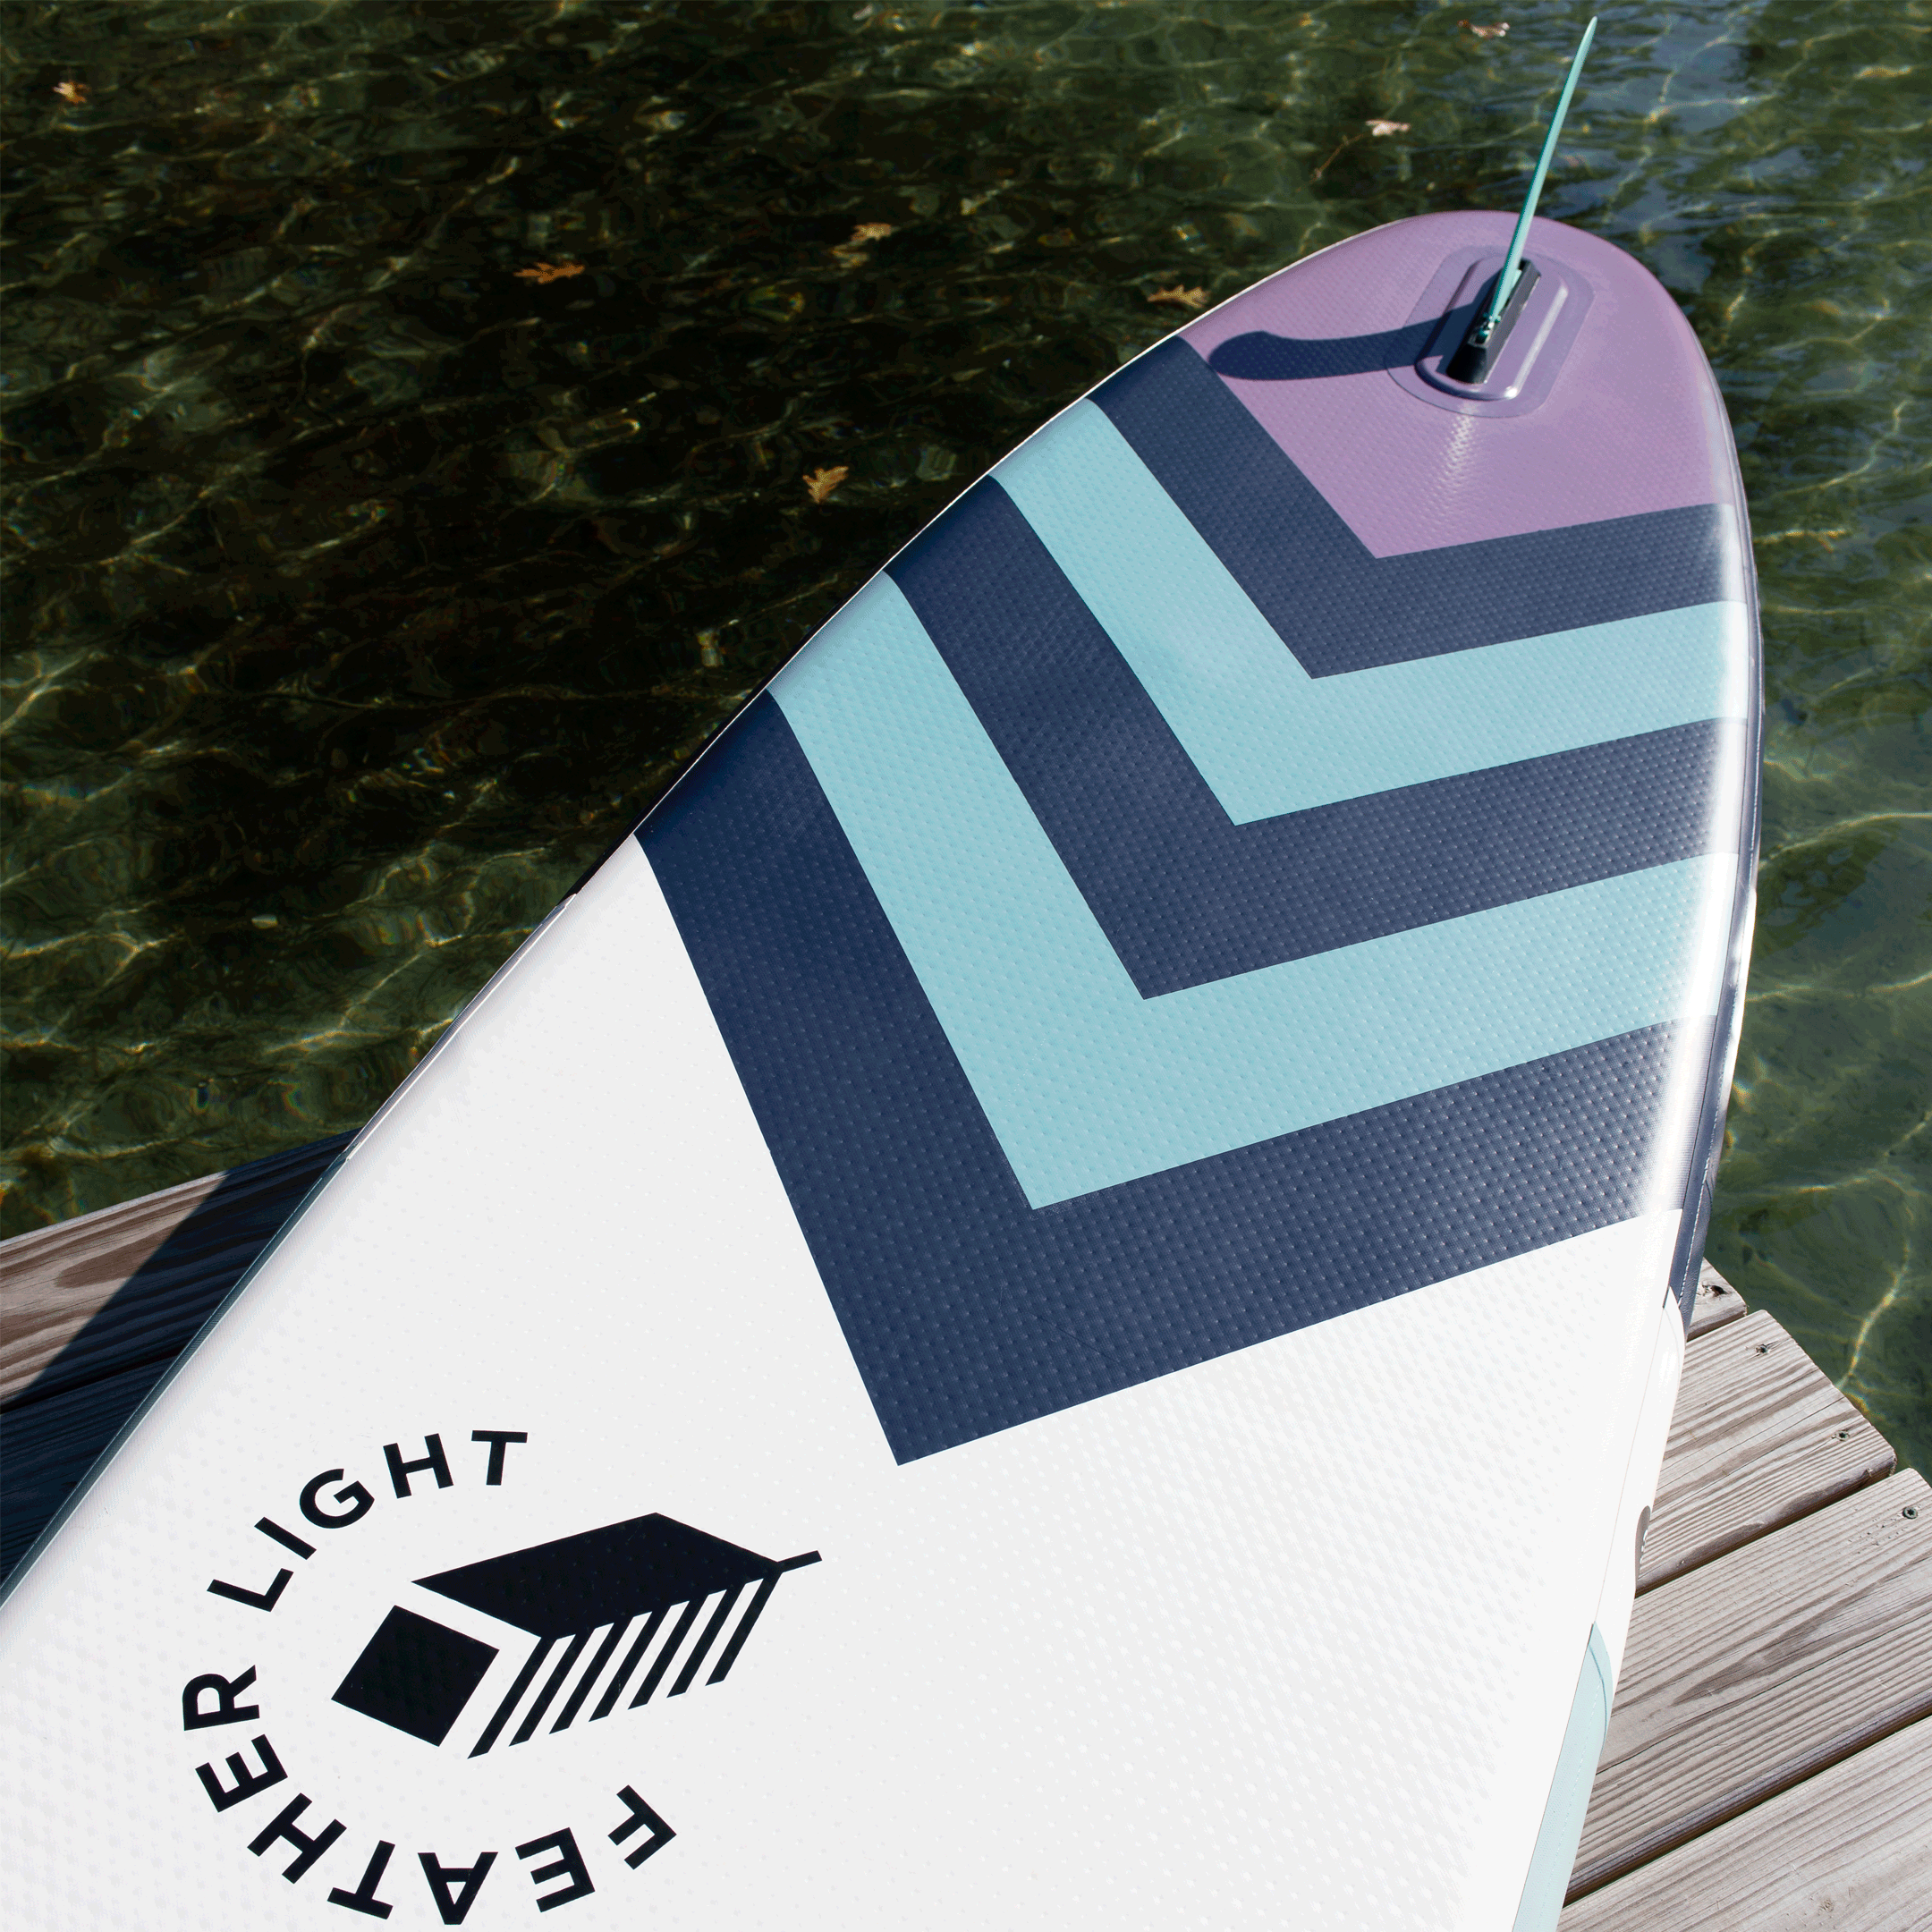 Feather Light Fit 10'8" Inflatable Yoga Paddle Board